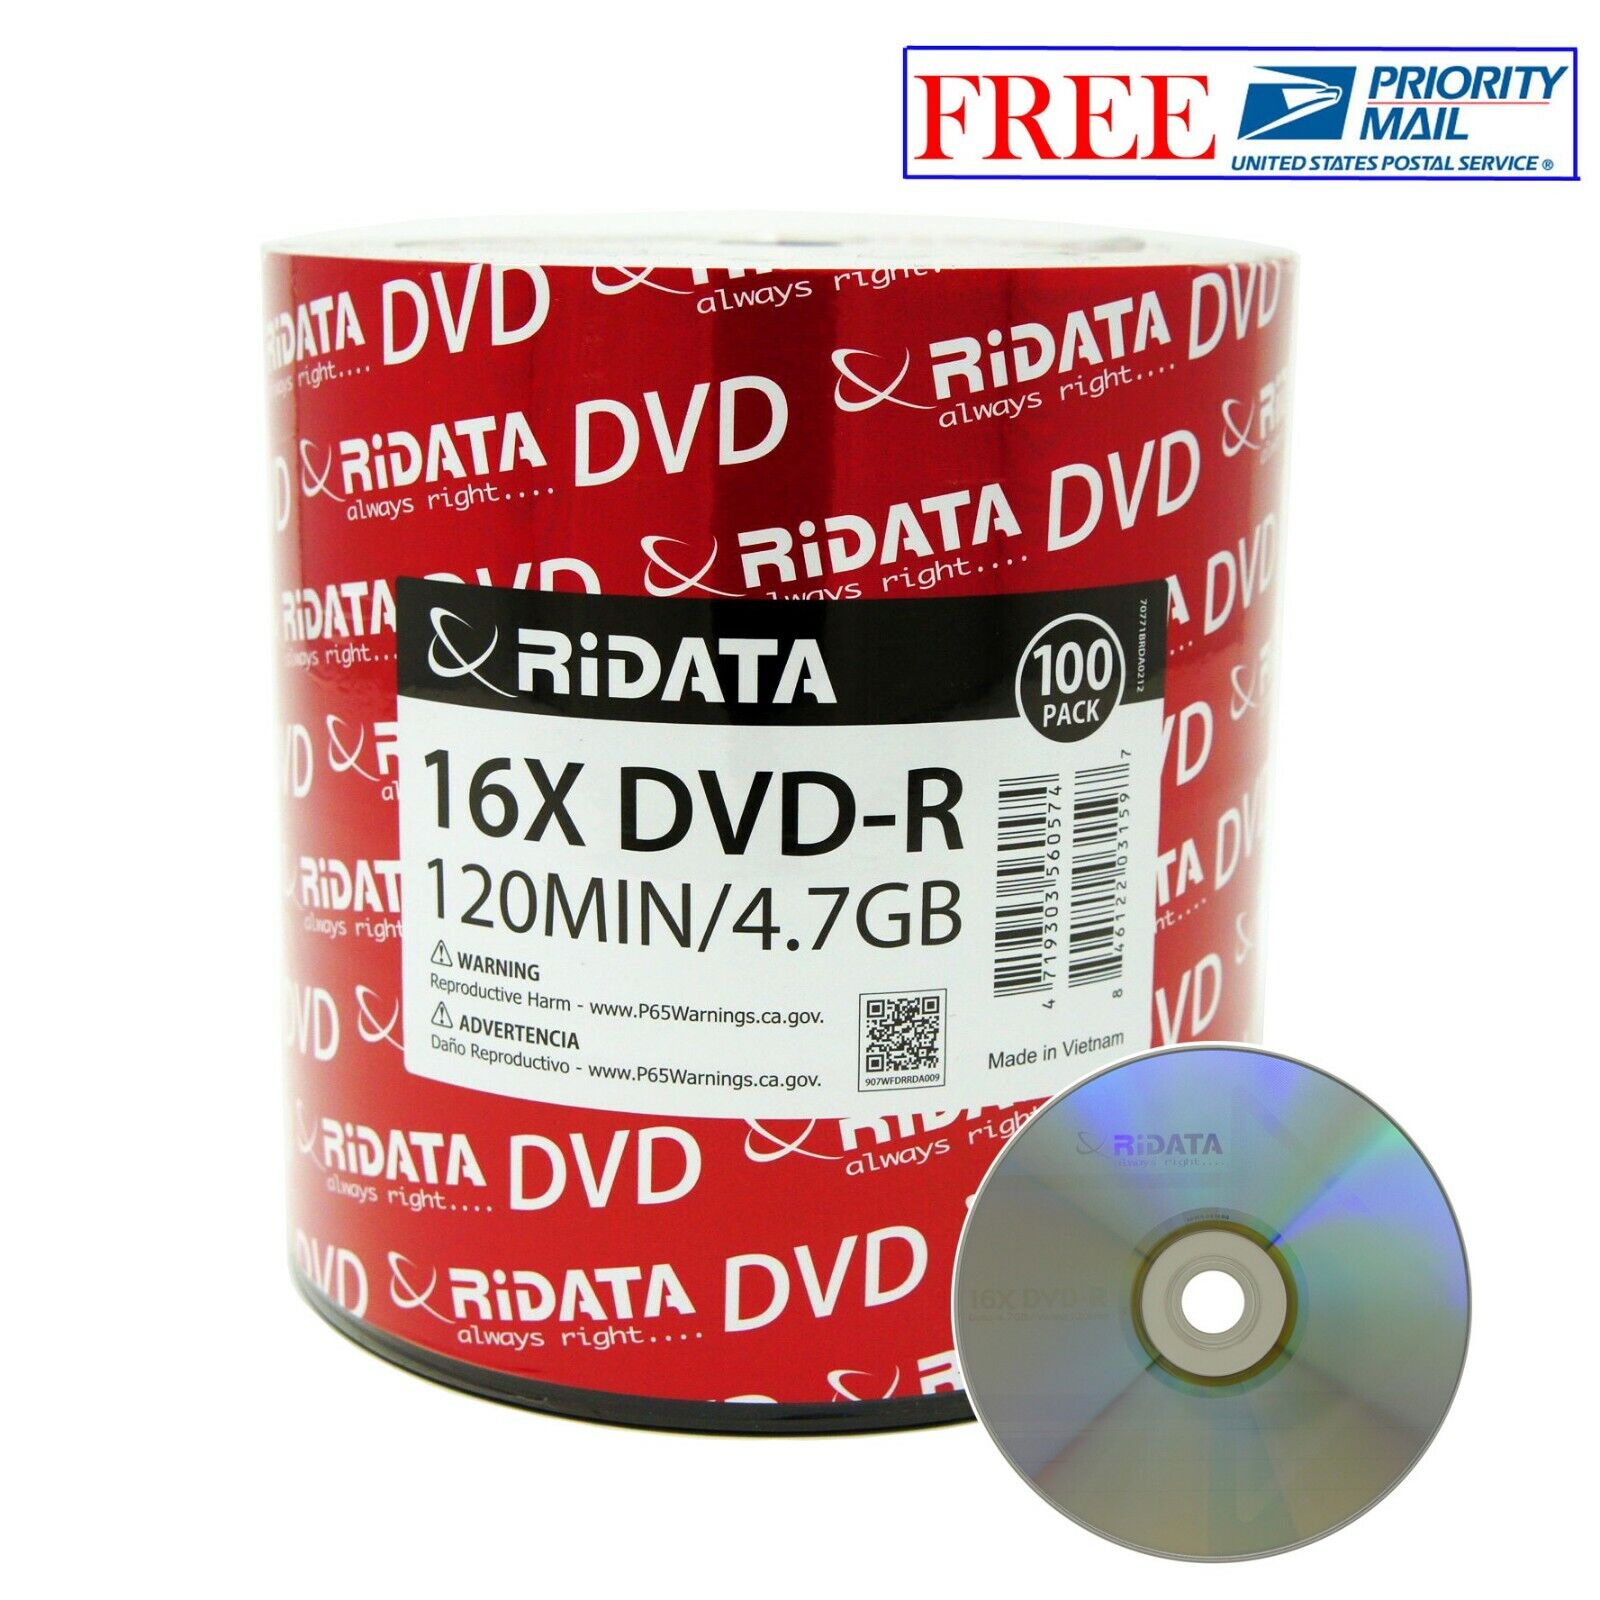 100 Pack Ridata DVD-R 16X 4.7GB 120 Min Silver Logo Top Blank Recordable Disc